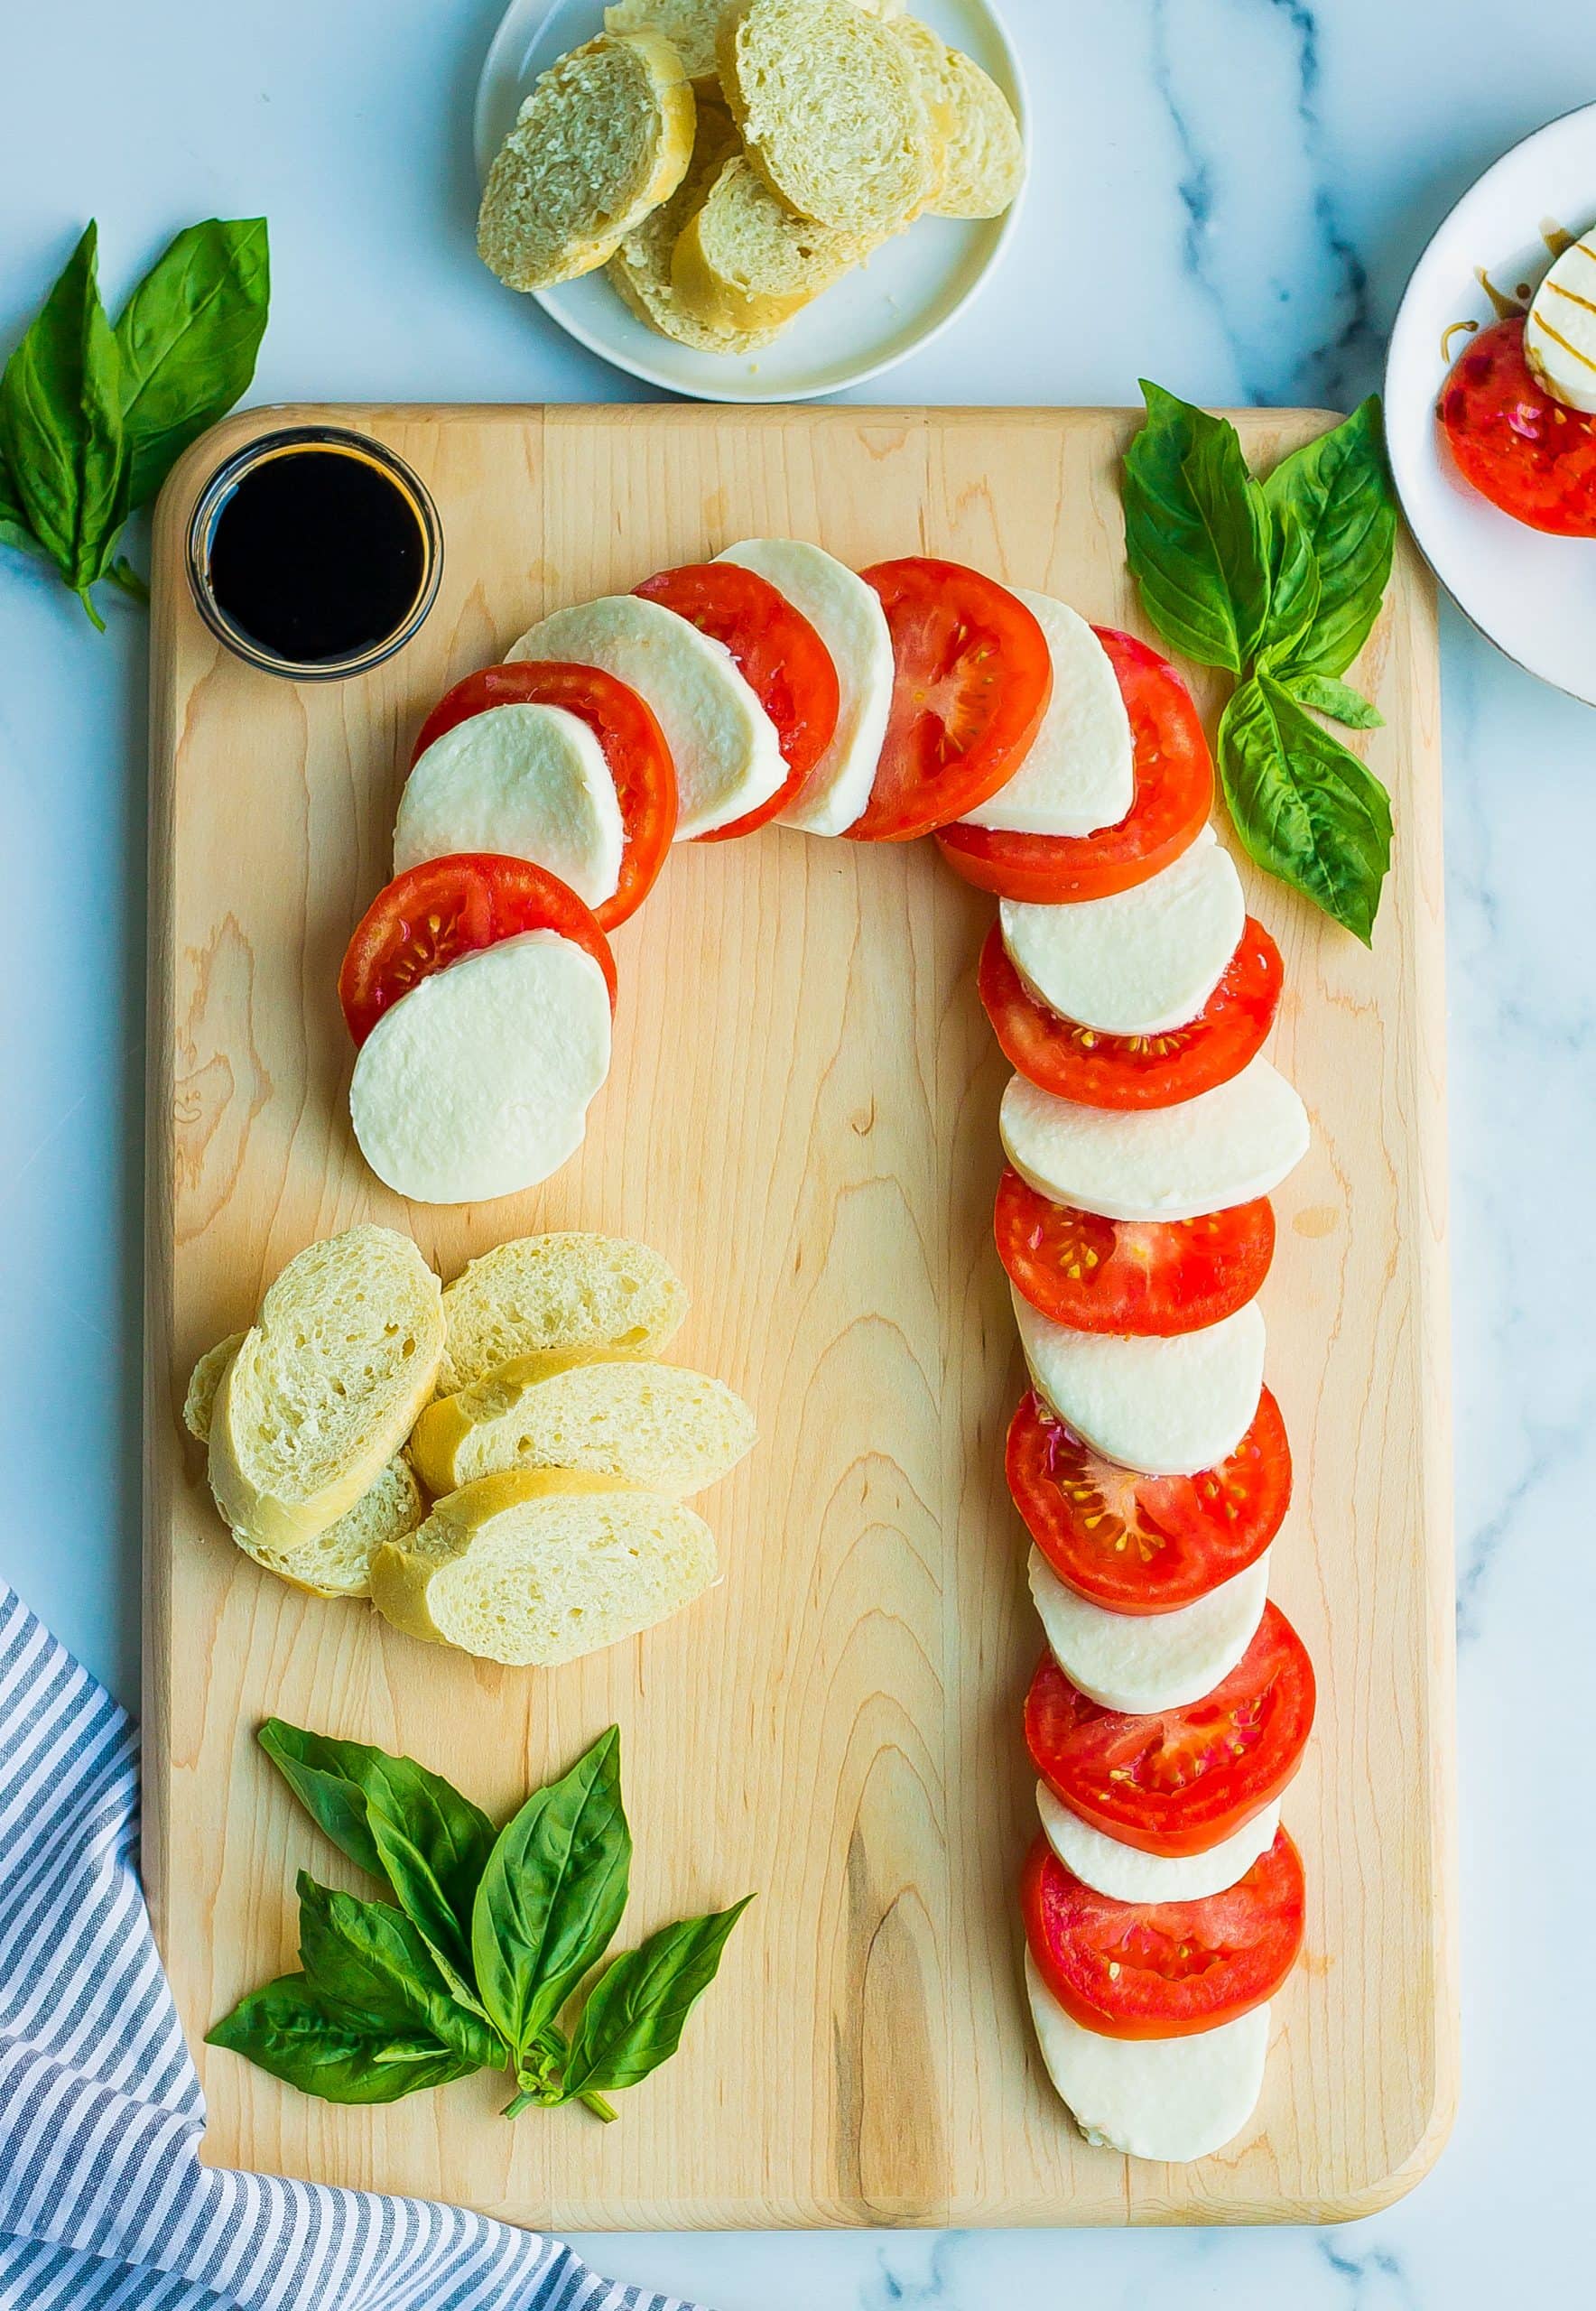 candy cane caprese salad on wooden cutting board with basil and bread